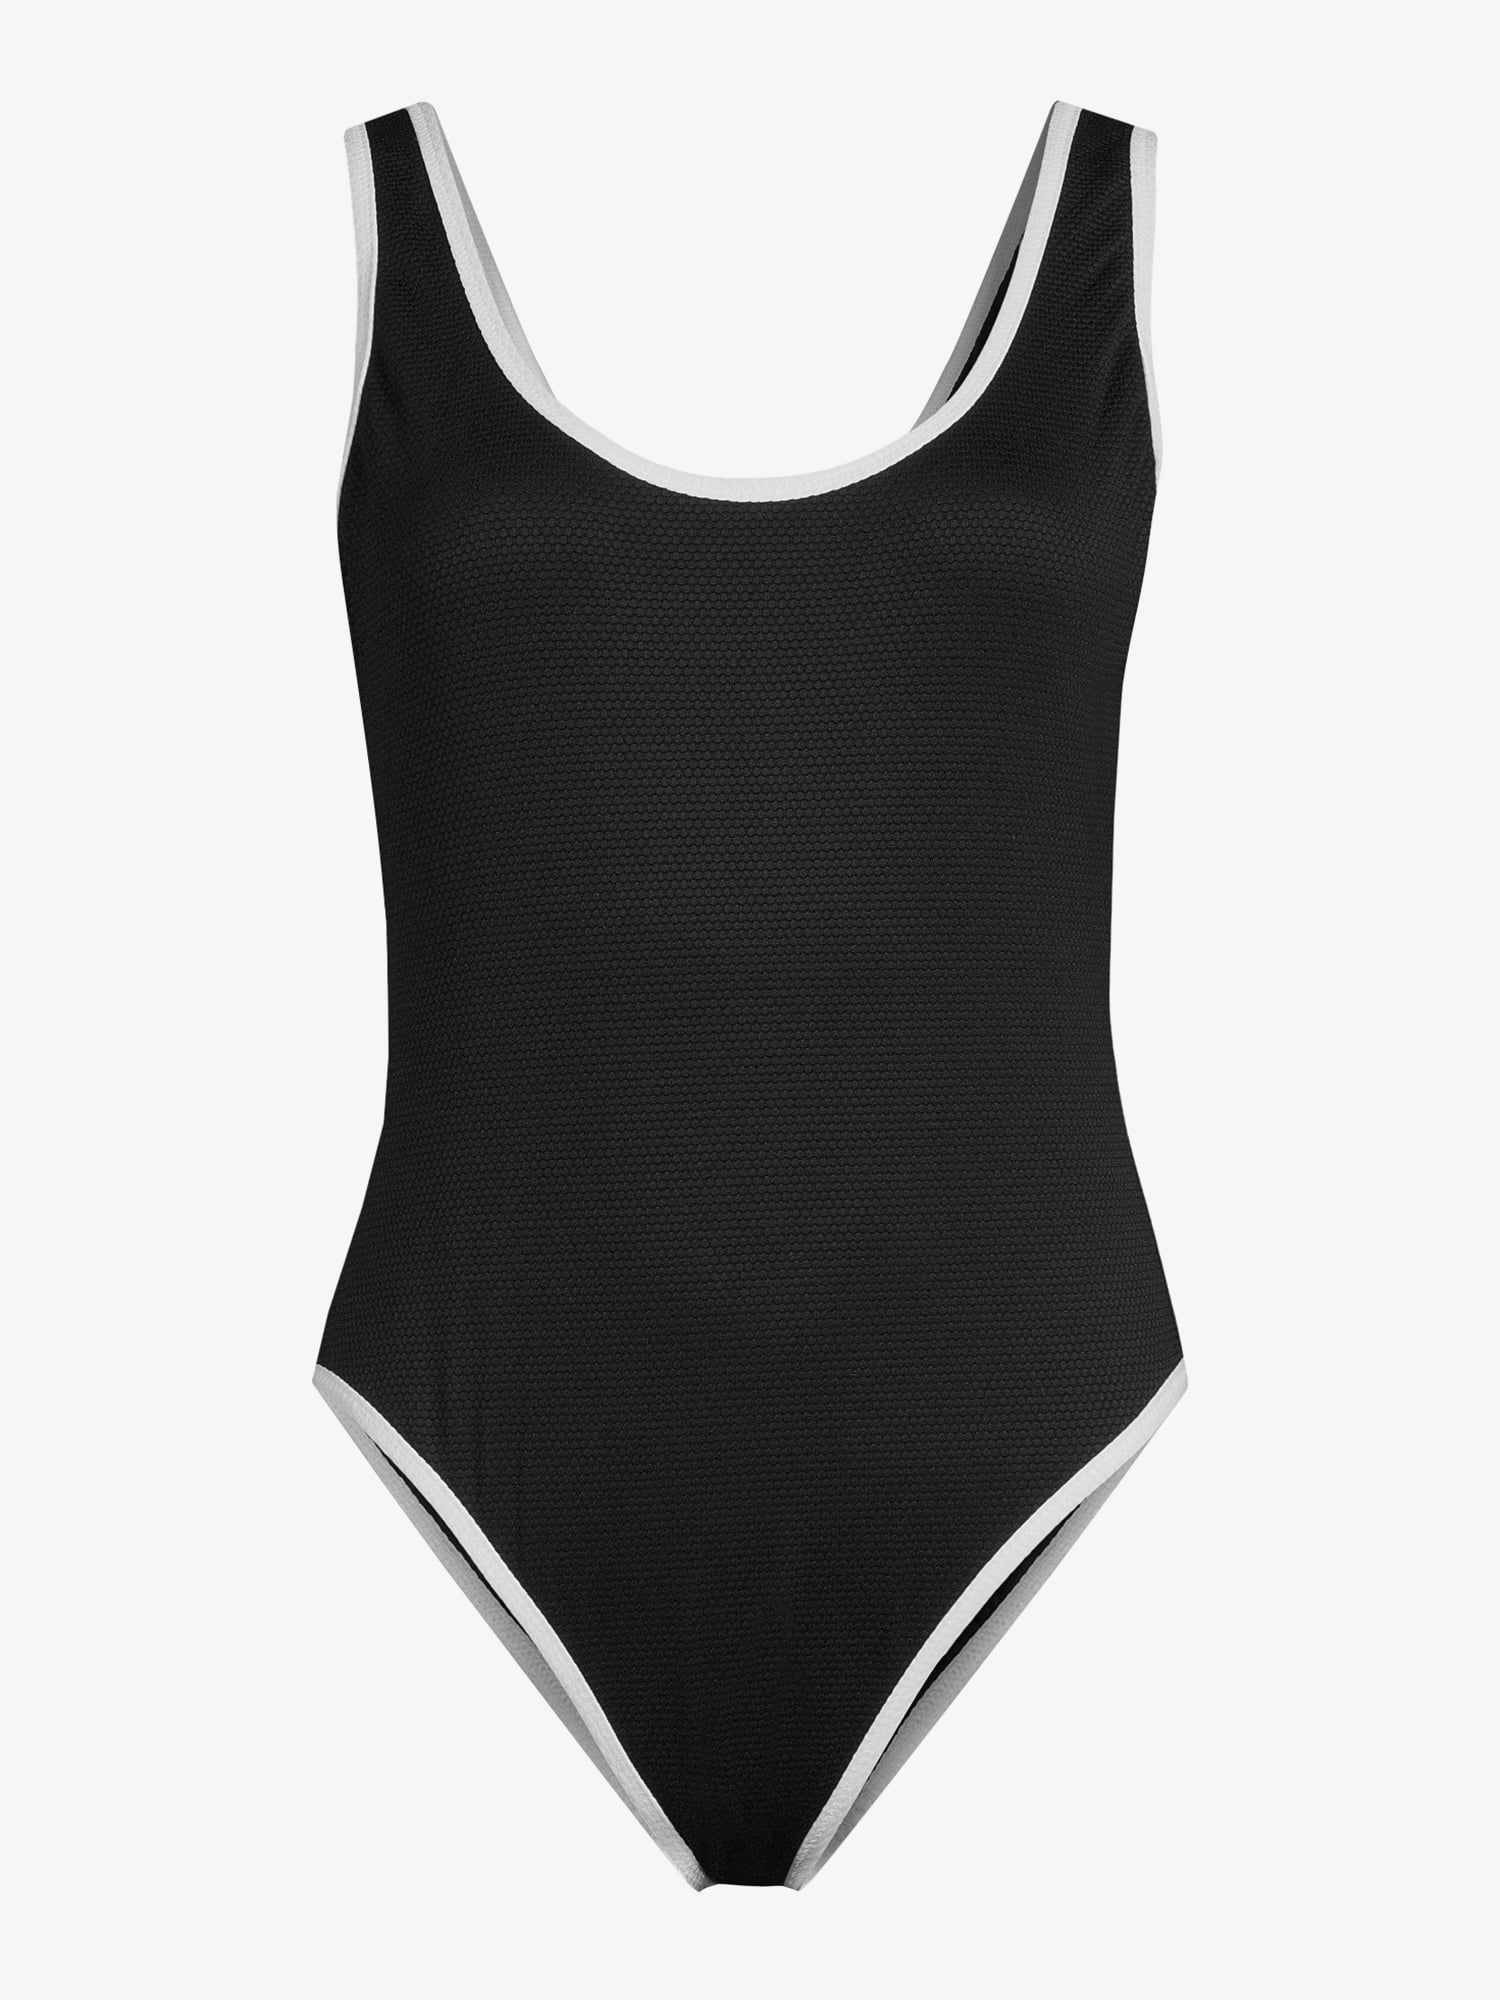 Love & Sports Women's Black Pique with White Piping Scooped Back Classic  One-Piece Swimsuit, Sizes XS-XXL 